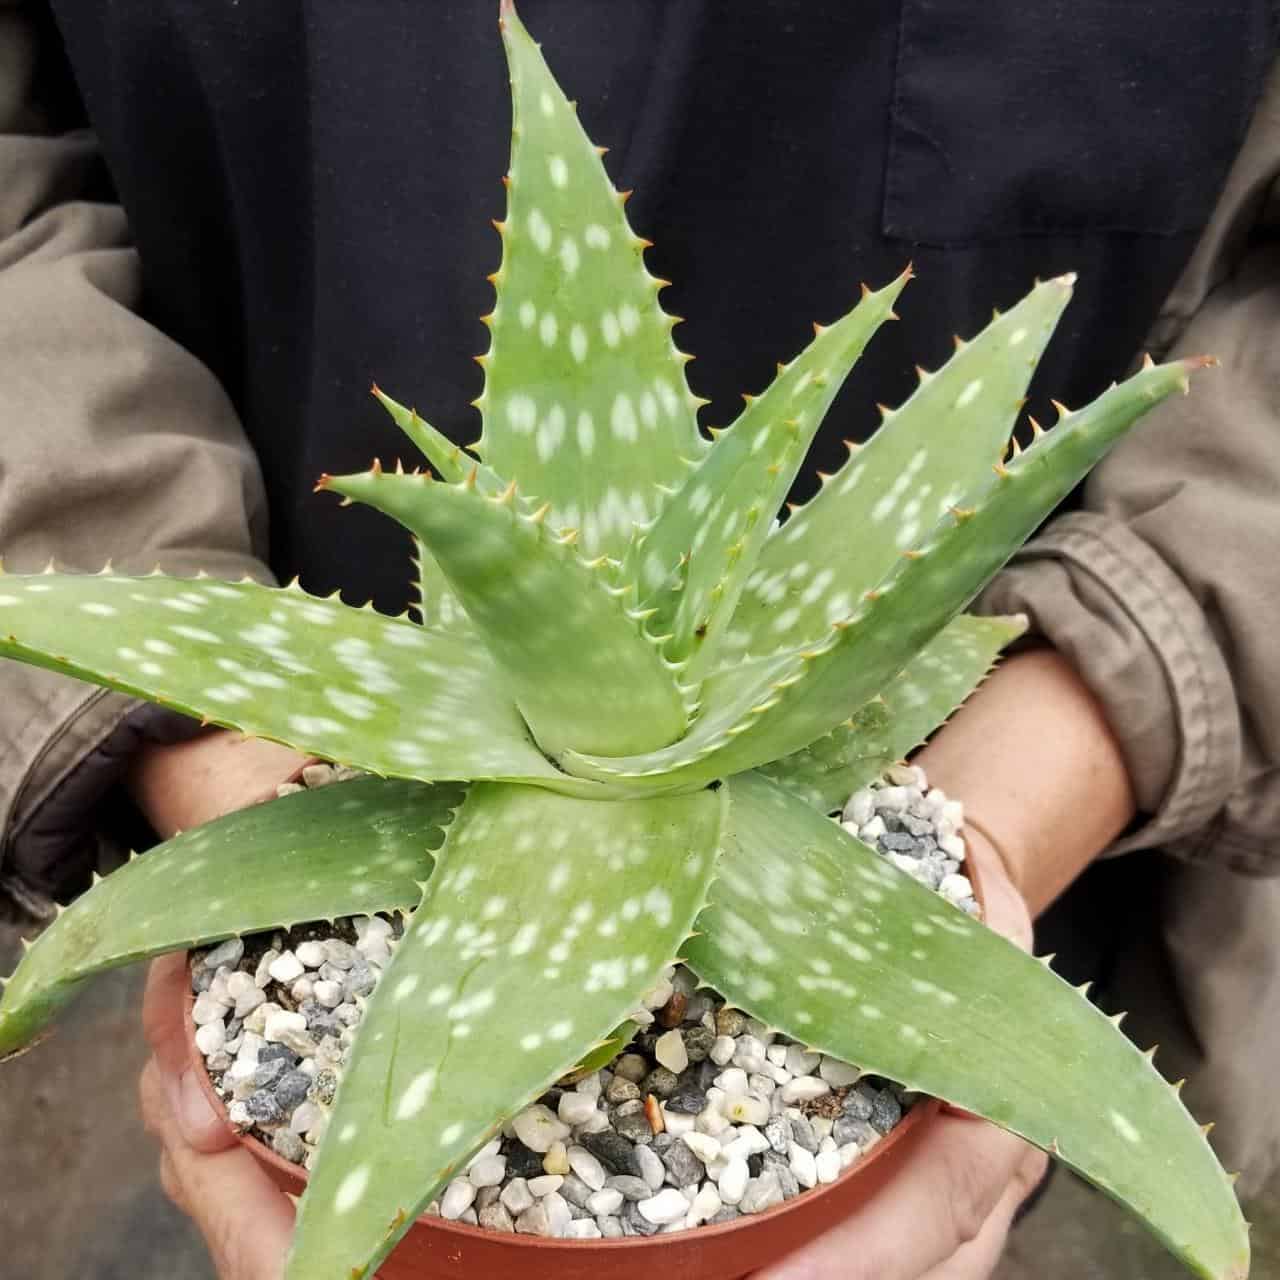 Soap Aloe vera variety in a pot held by hands.